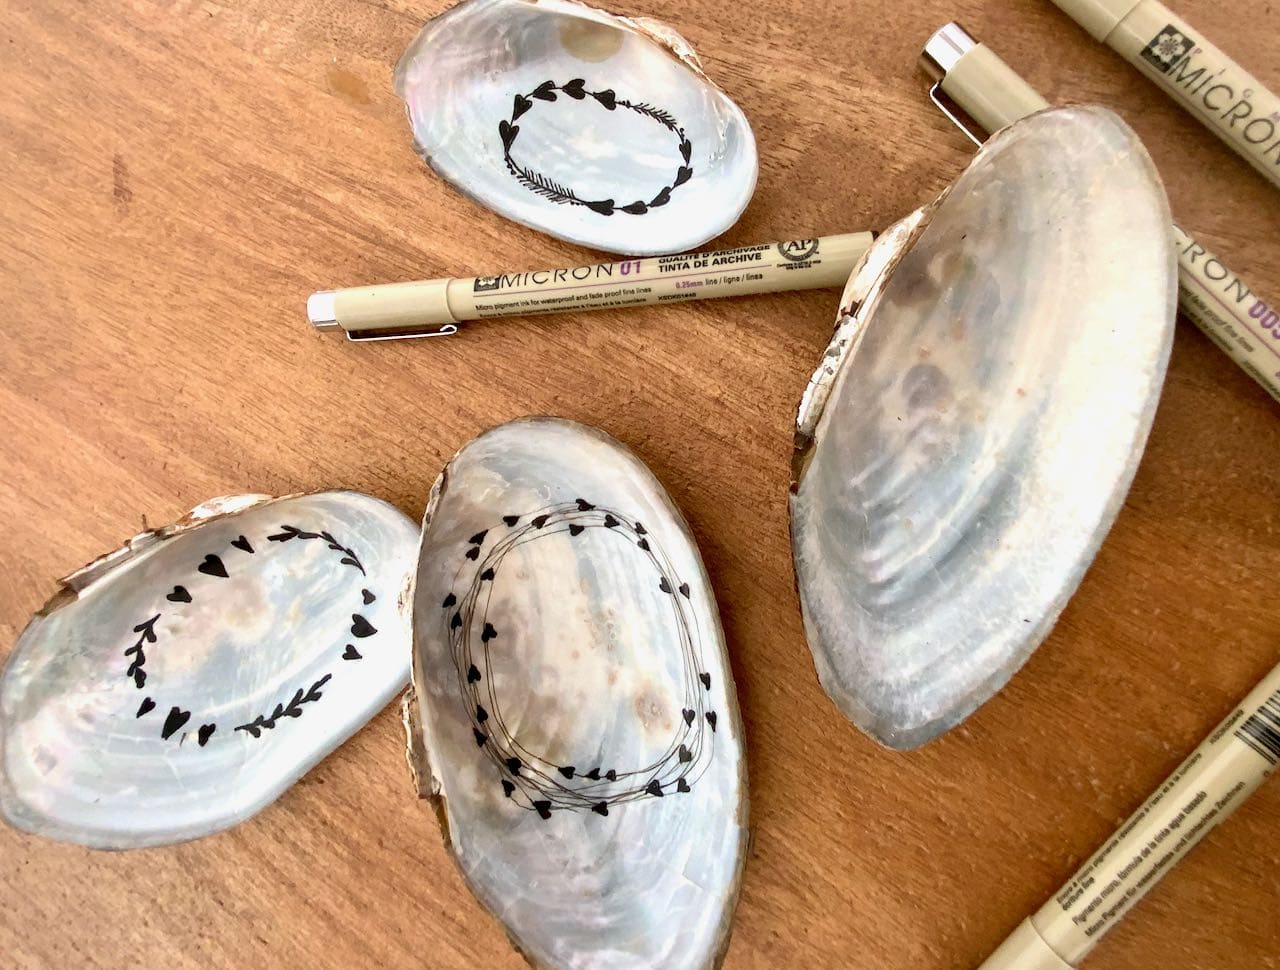 micron pens with doodled hearts inside shells on wood table